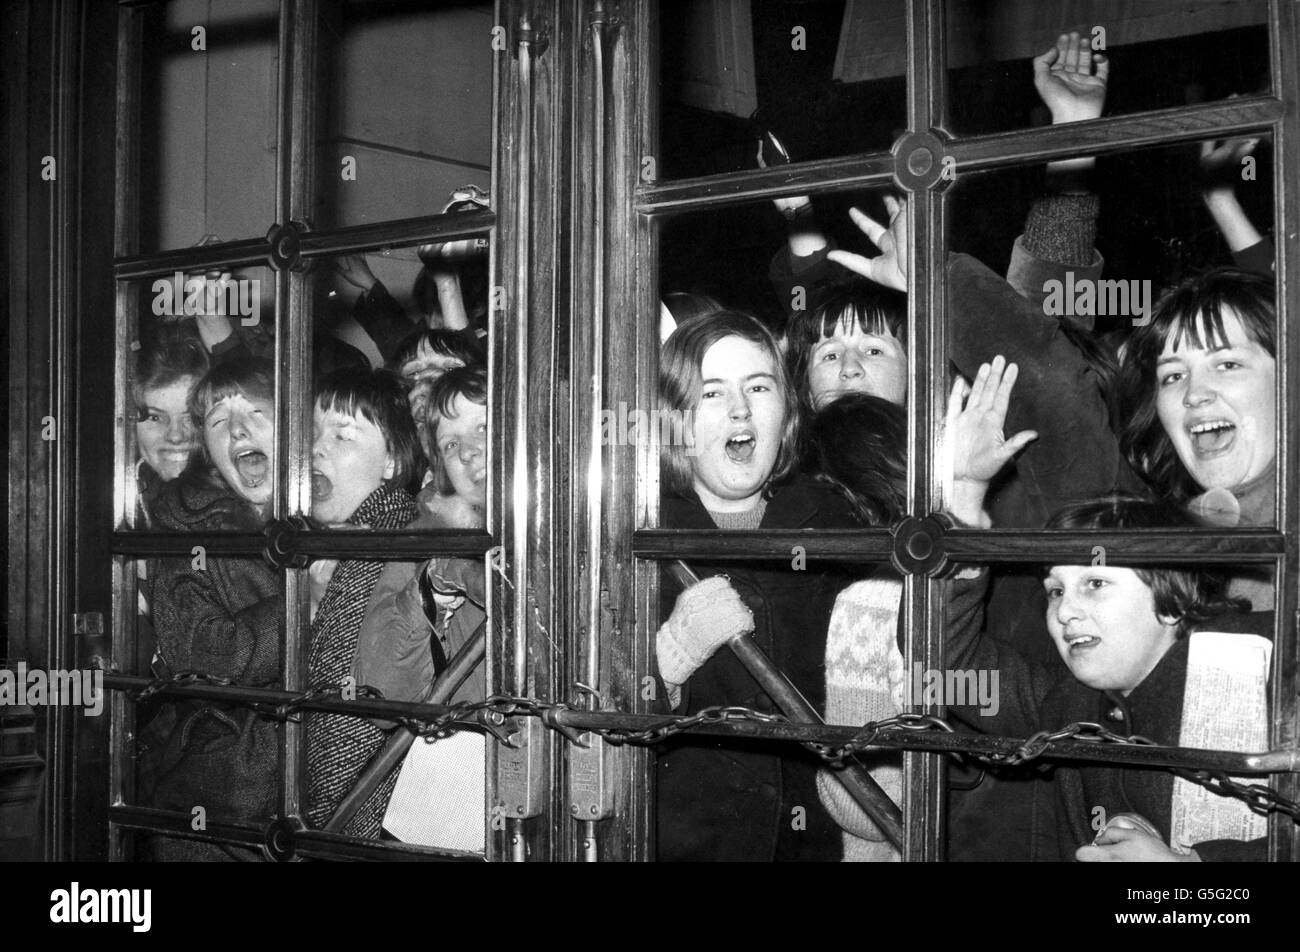 Screaming fans outside the heavily-chained doors of the Scala Theatre, London. Inside were the Beatles, shooting scenes for their first film. Police guarded the doors although some teenagers were allowed in to play the role of extras in the film. Stock Photo